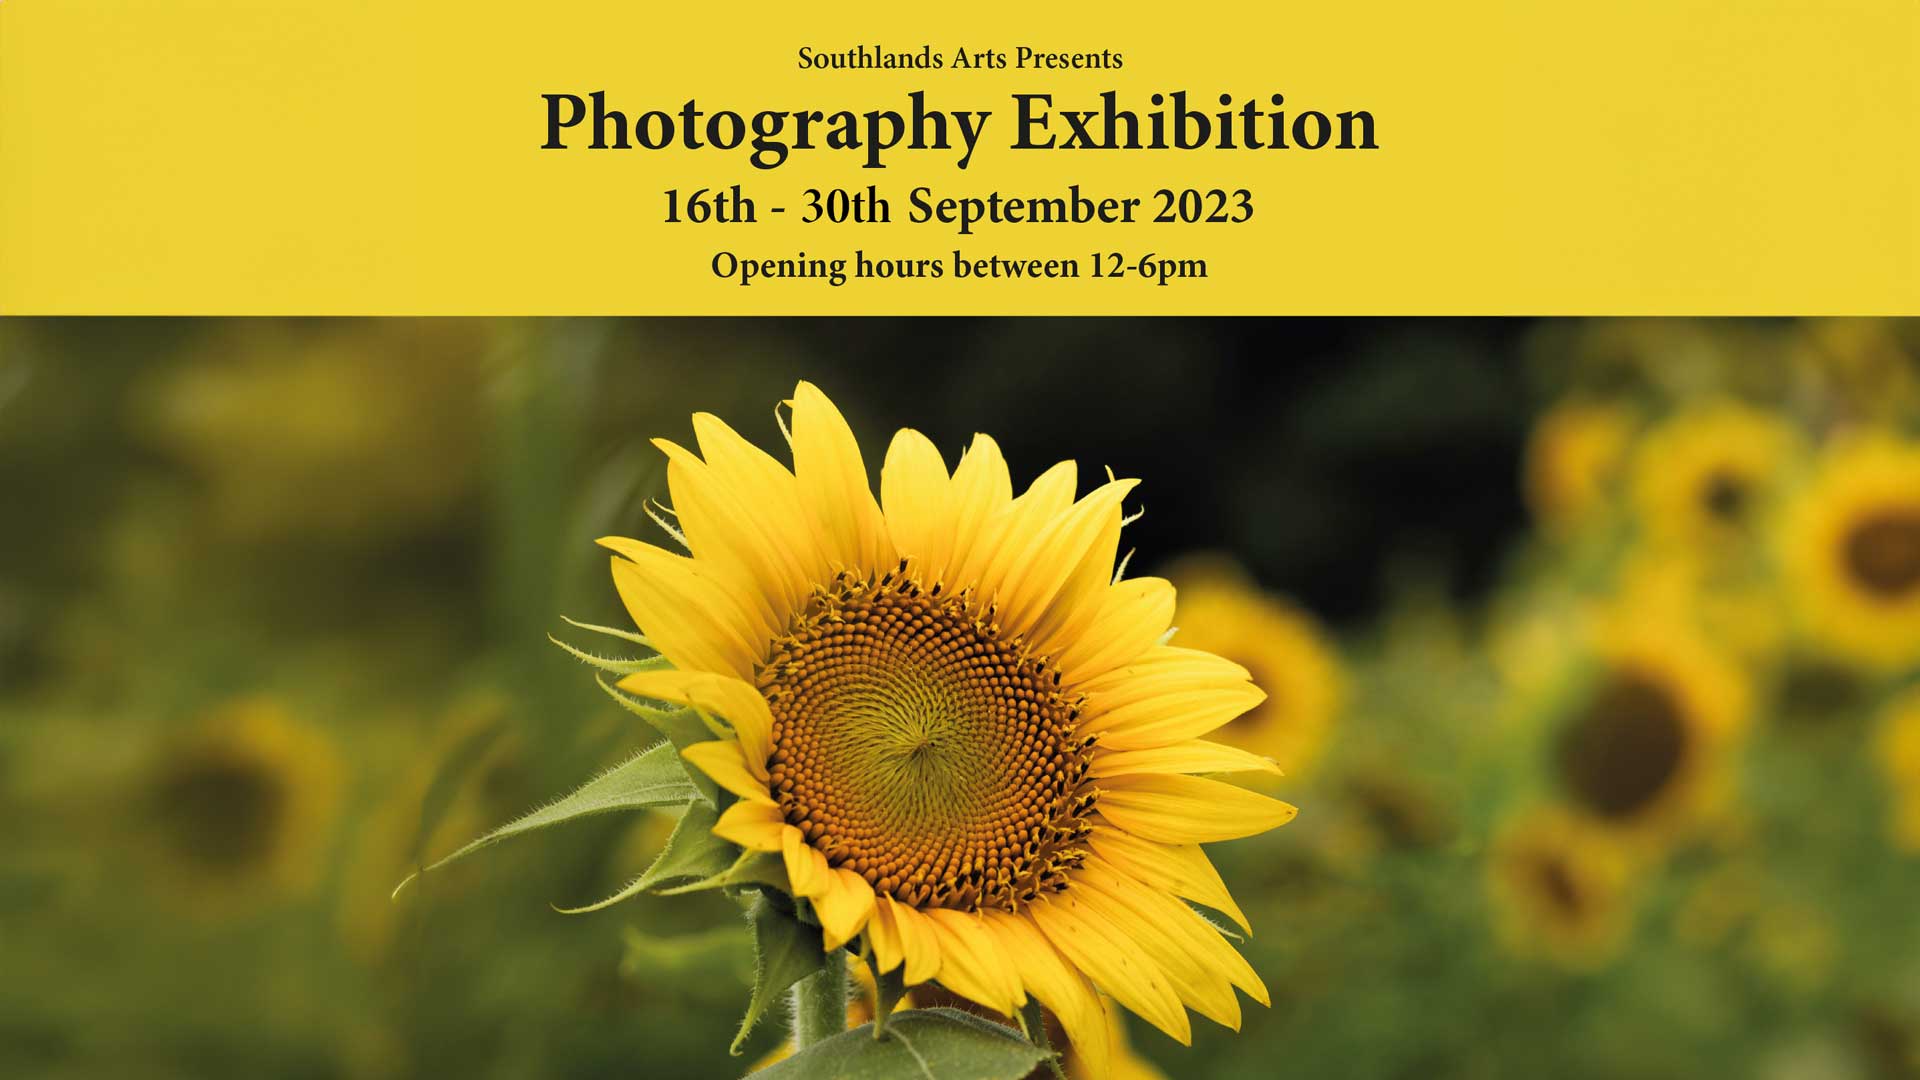 Photo Exhibition 16th - 30th September 2023 Southlands Arts - West Drayton & Yiewsley